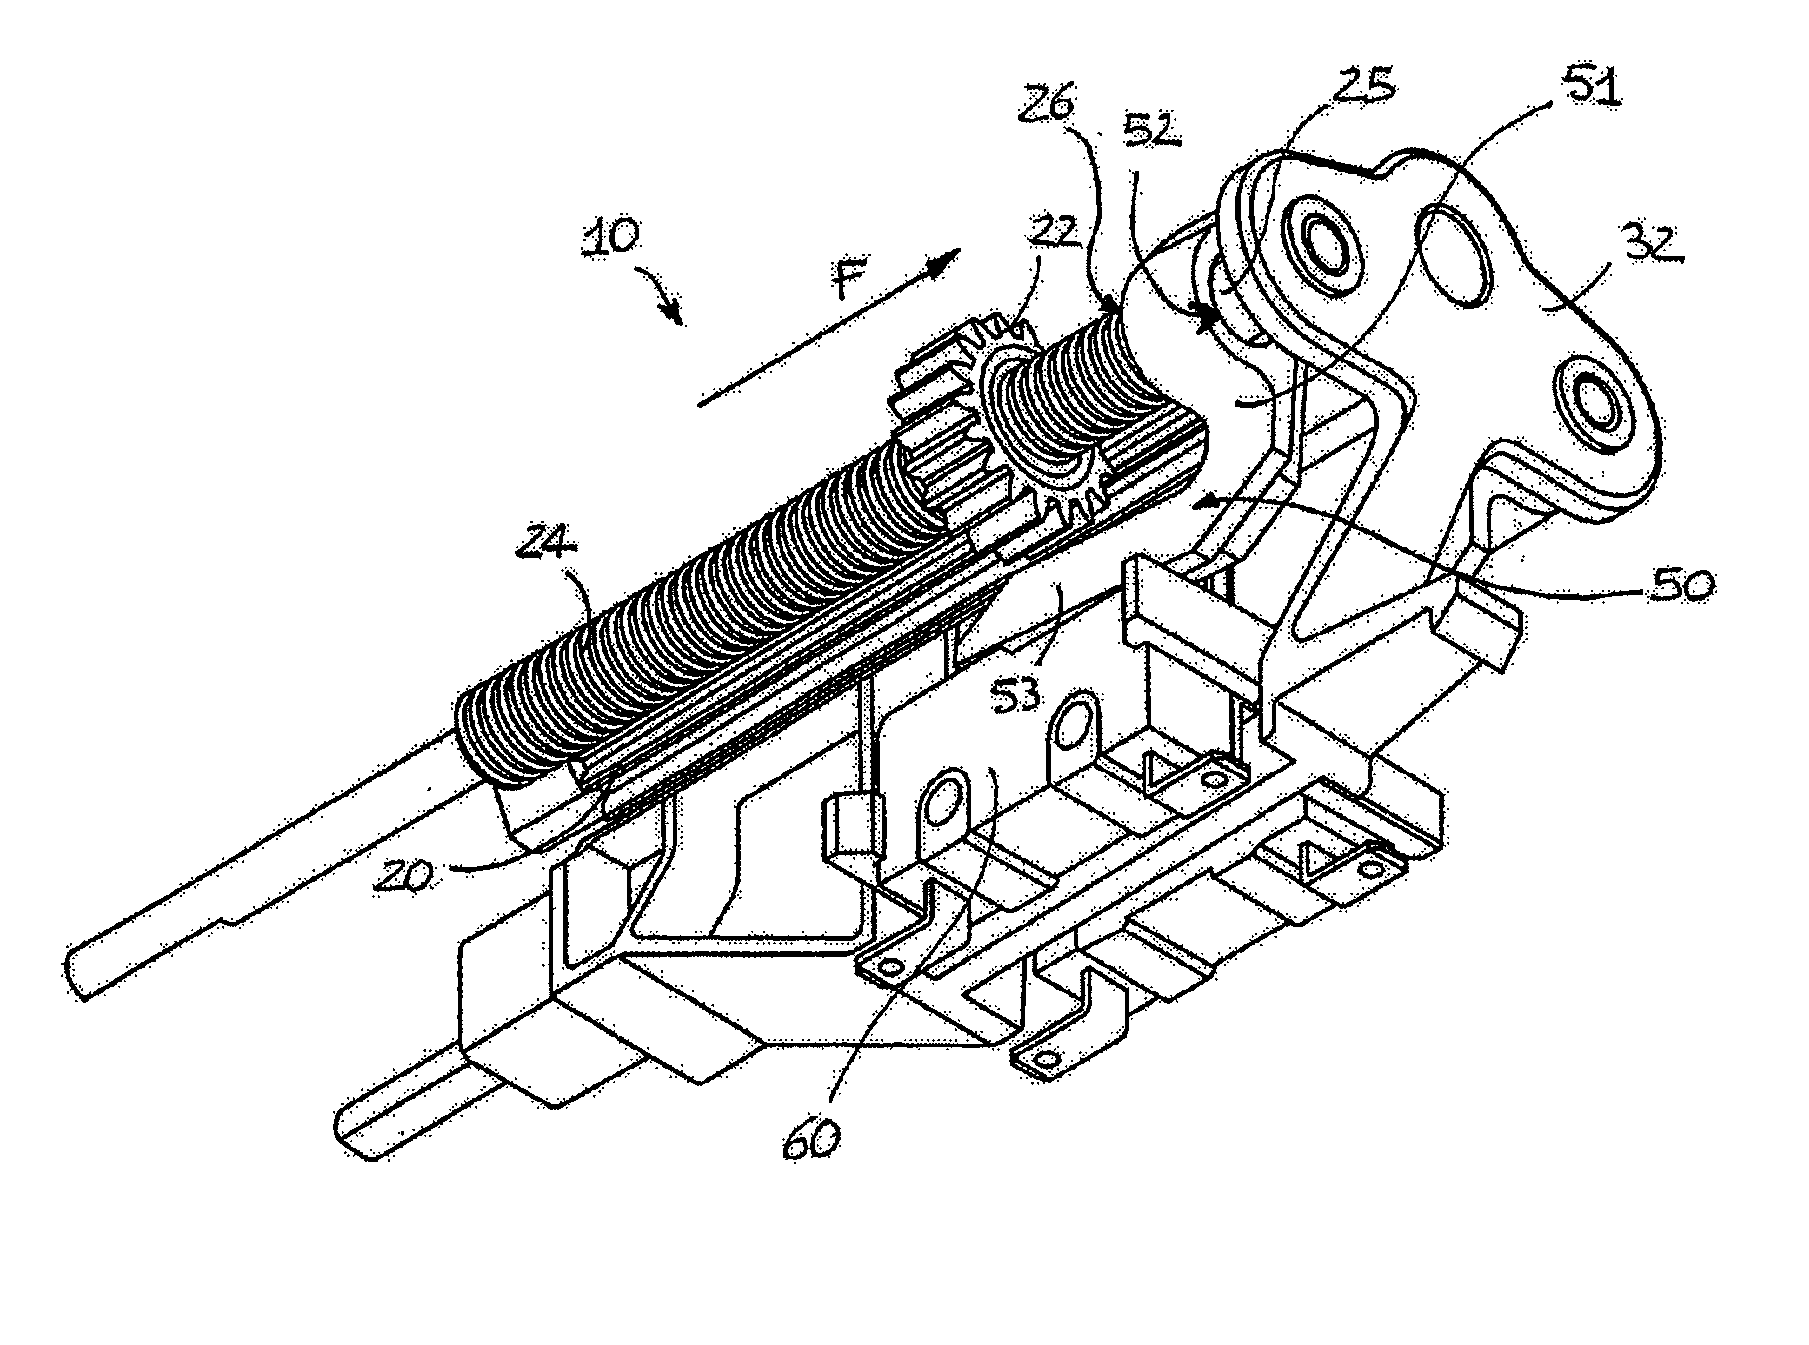 End-of-travel device for actuating systems of roller blinds or sun shades